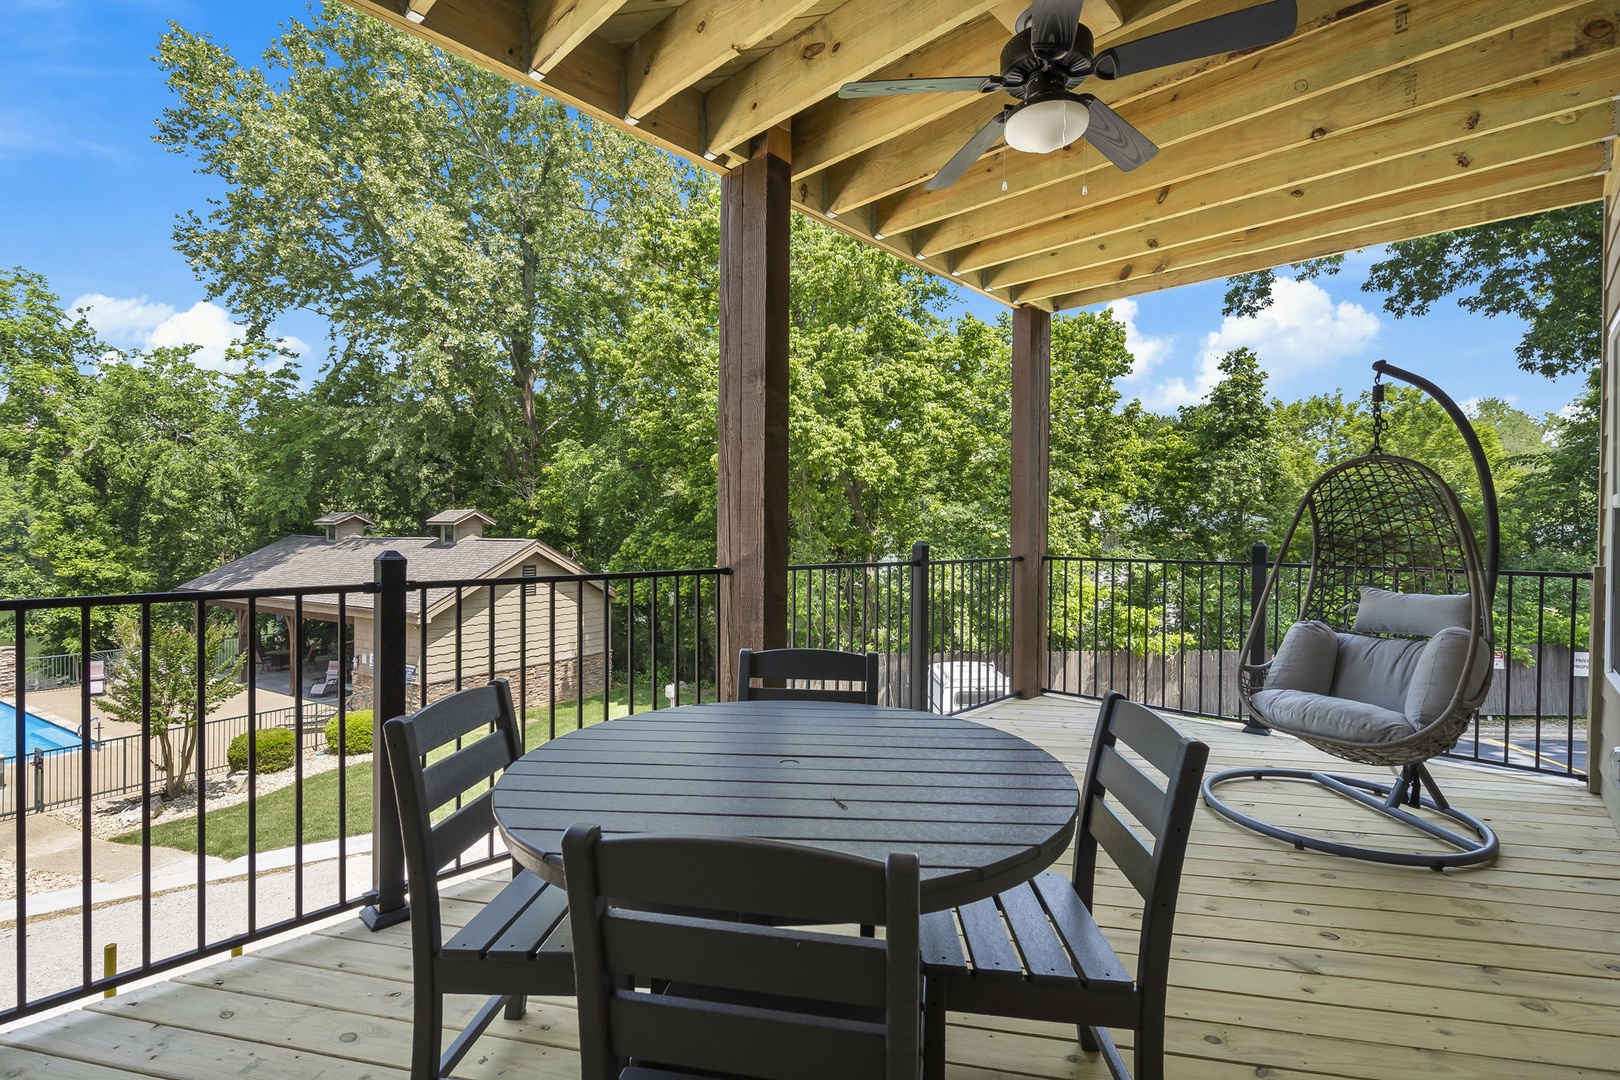 Take in the fresh air while lounging or dining on the back deck